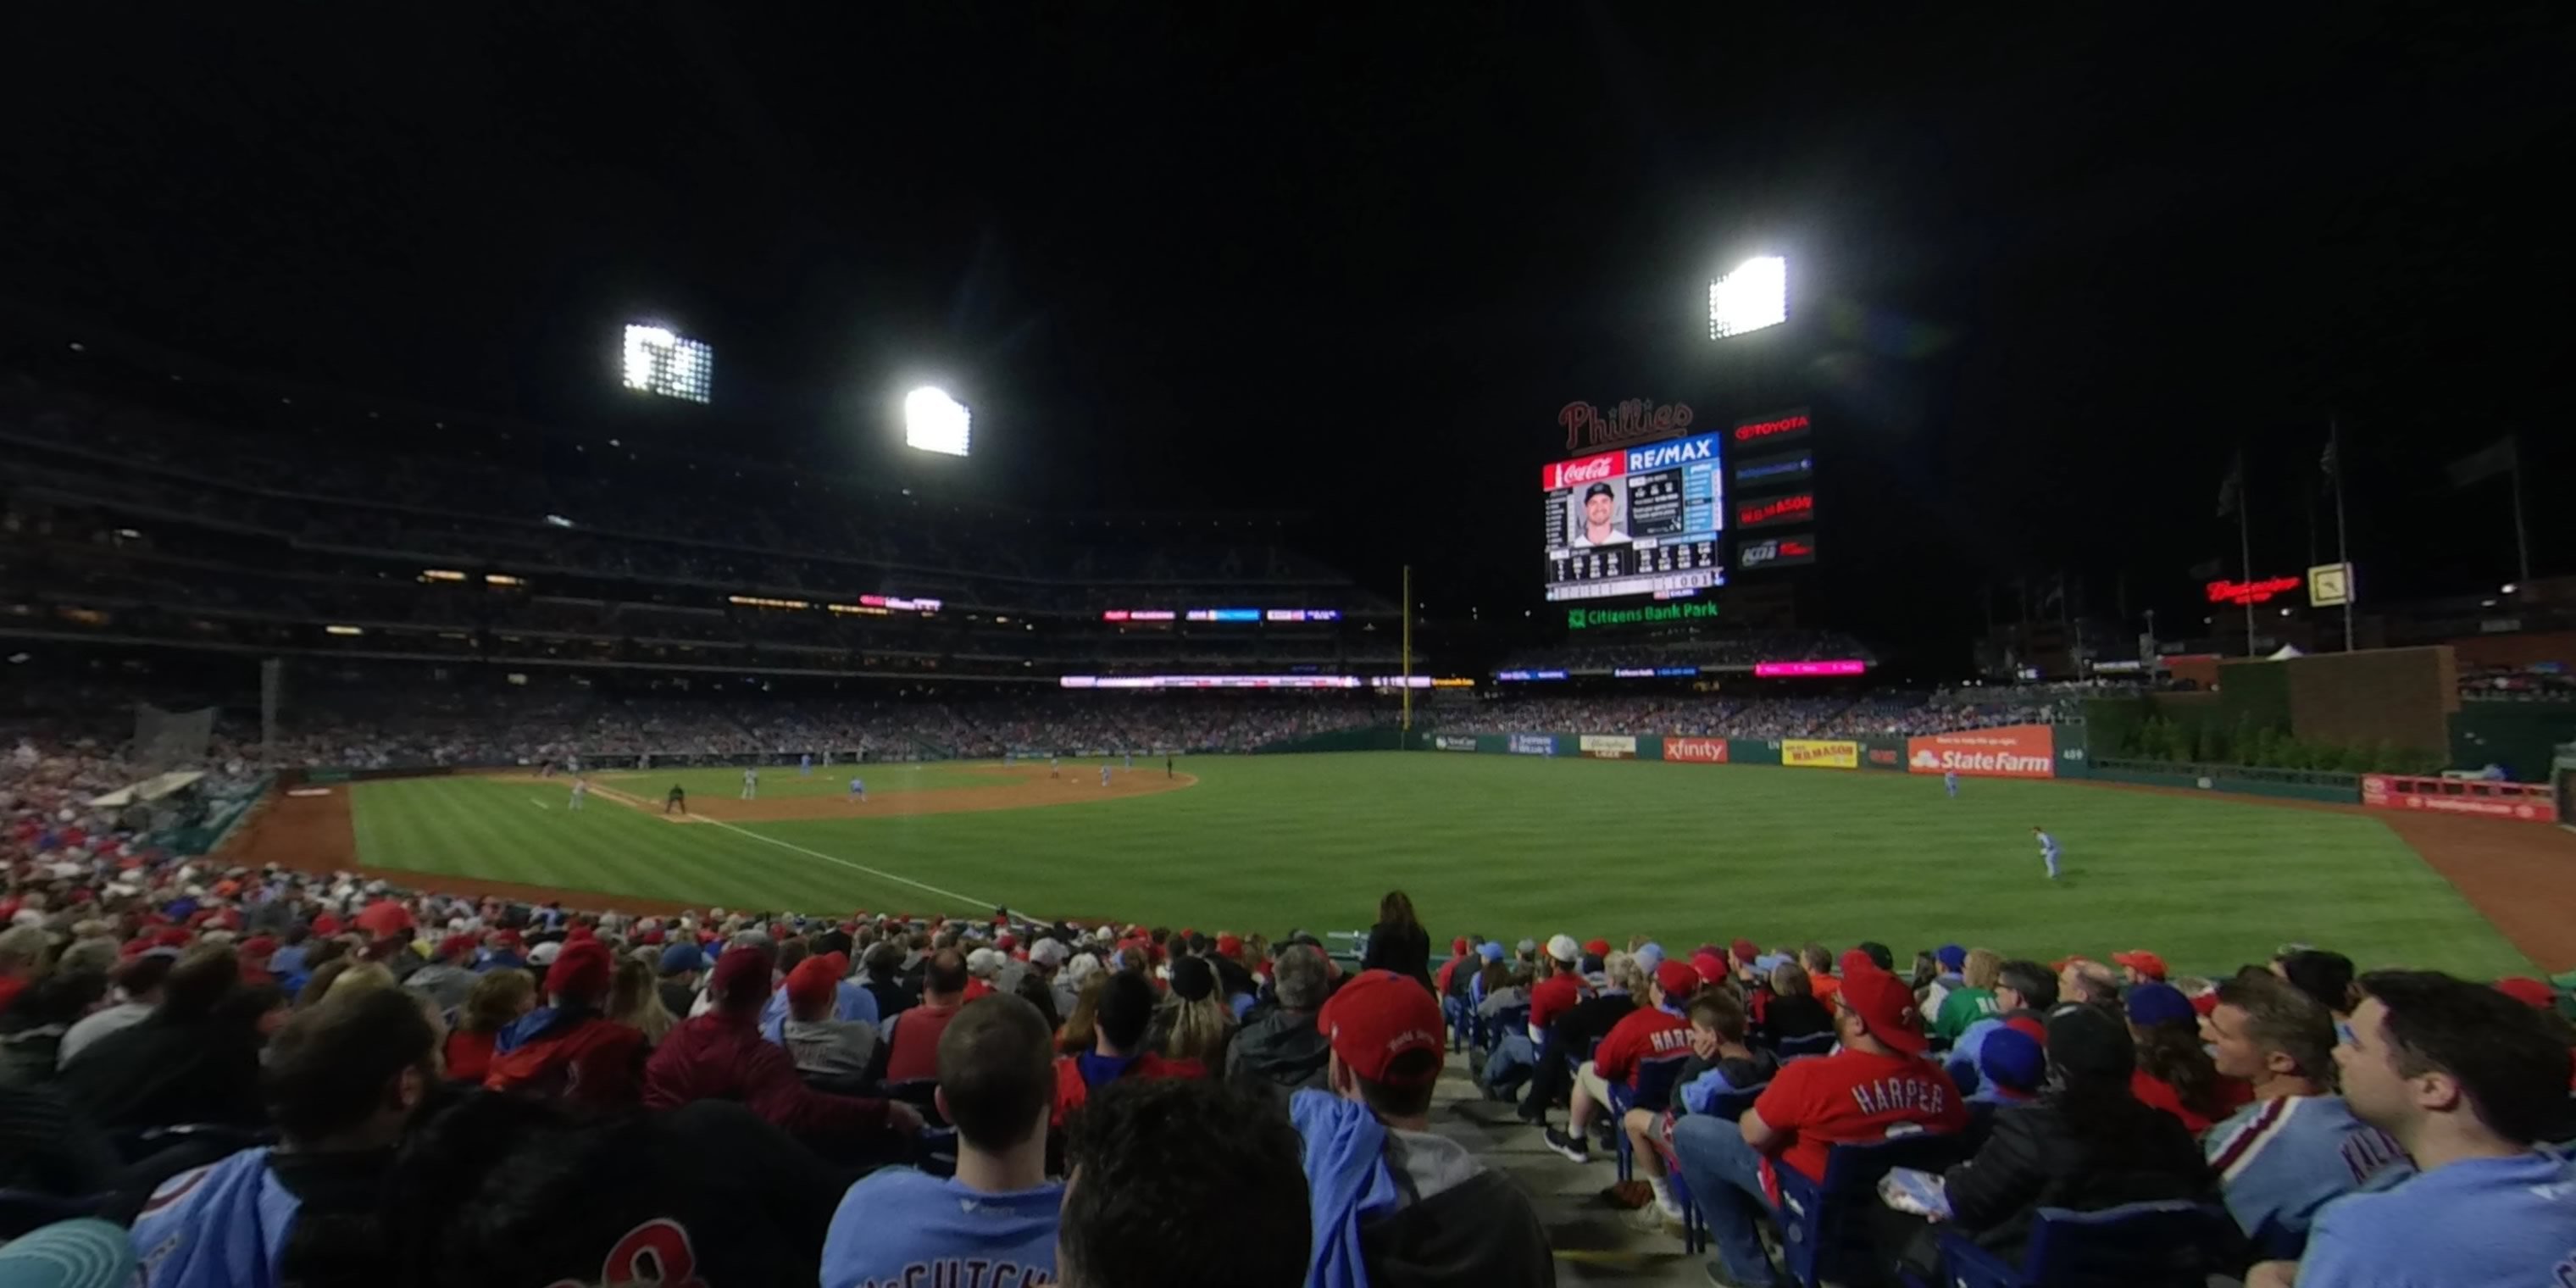 section 108 panoramic seat view  for baseball - citizens bank park